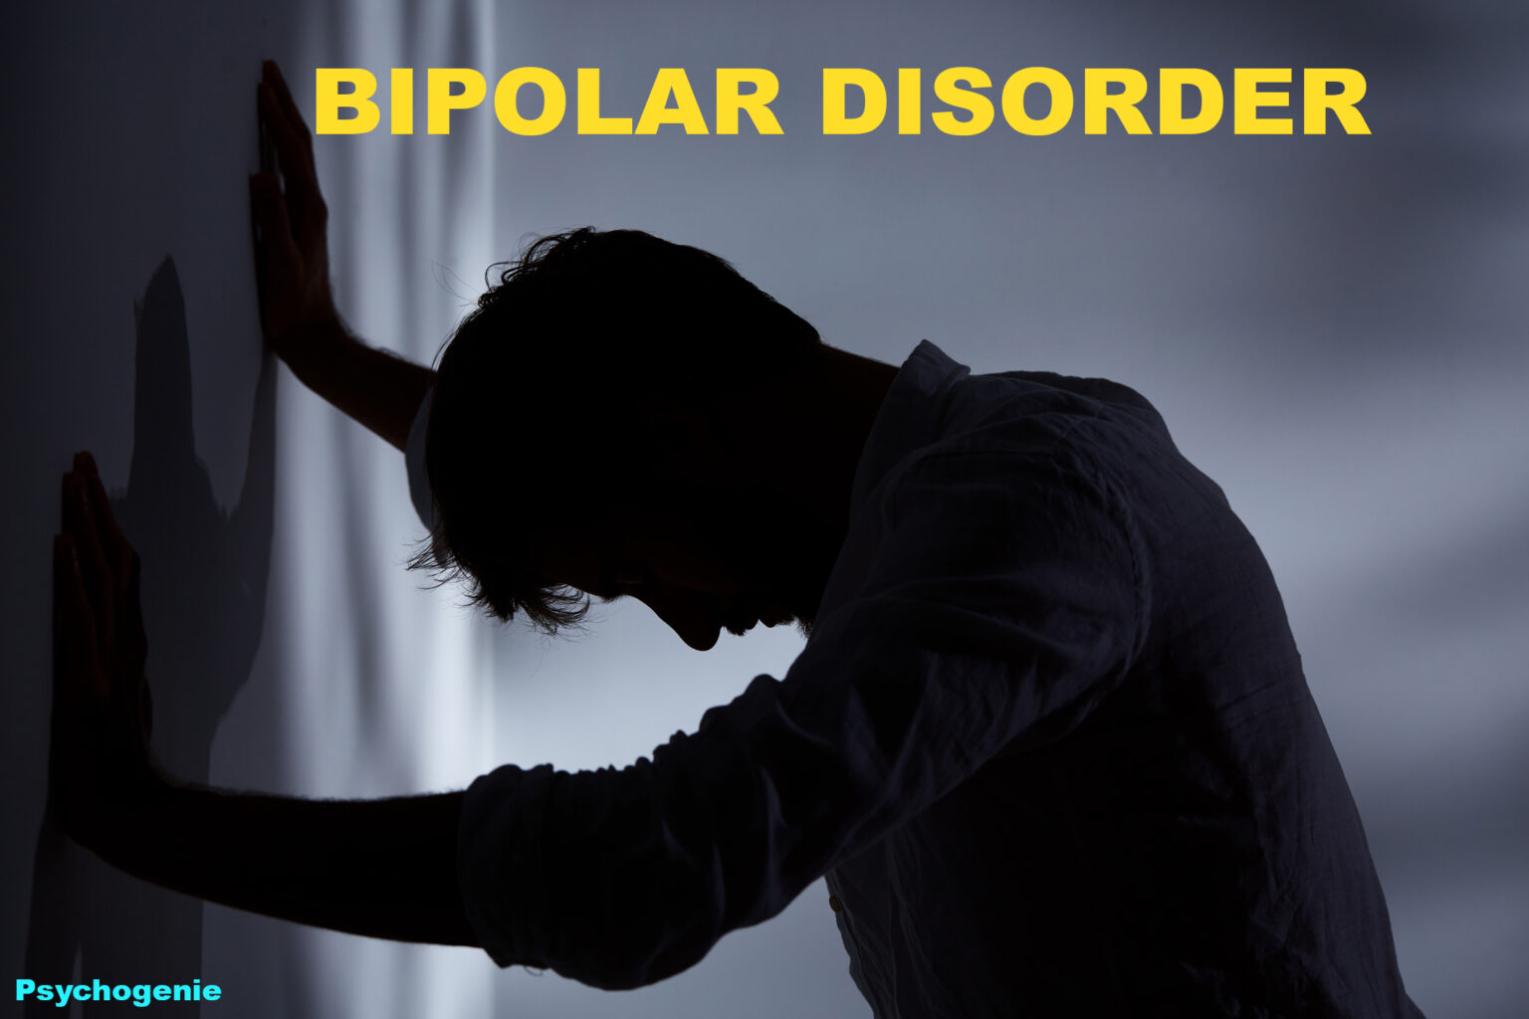 What Are the Long-Term Effects of Taking Bipolar Disorder Medications?